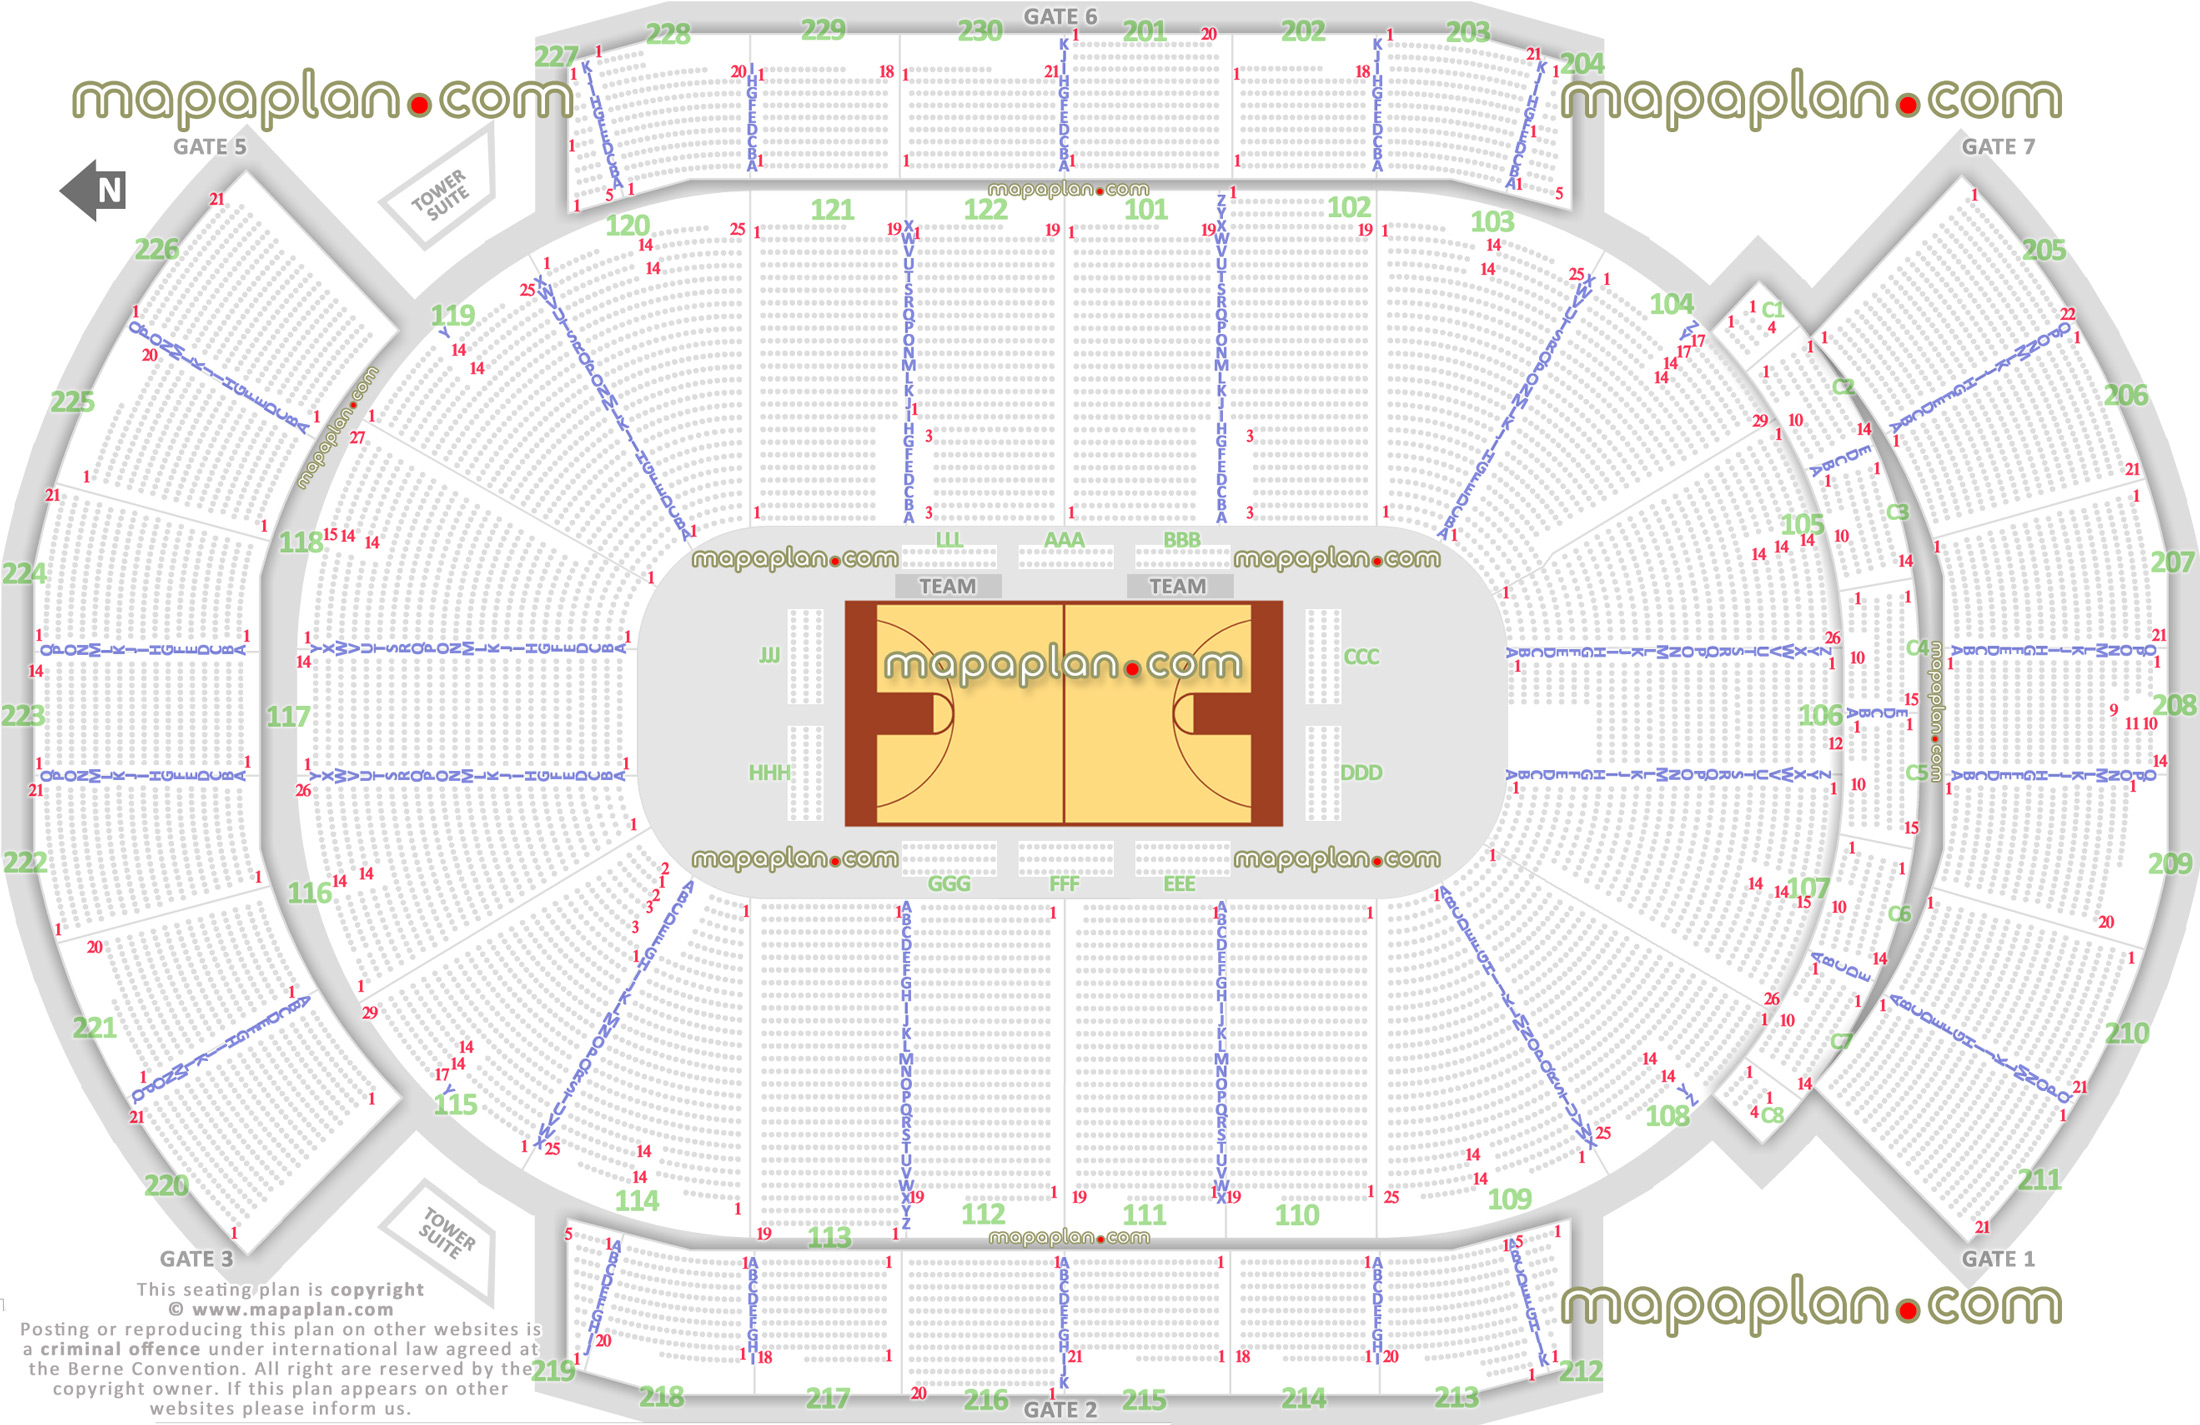 basketball games seating capacity arrangement diagram glendale arena interactive virtual 3d detailed layout glass rinkside center straights sides seats corner ends full exact row numbers plan seats row lower club upper level stadium bowl sections Glendale Desert Diamond Arena seating chart